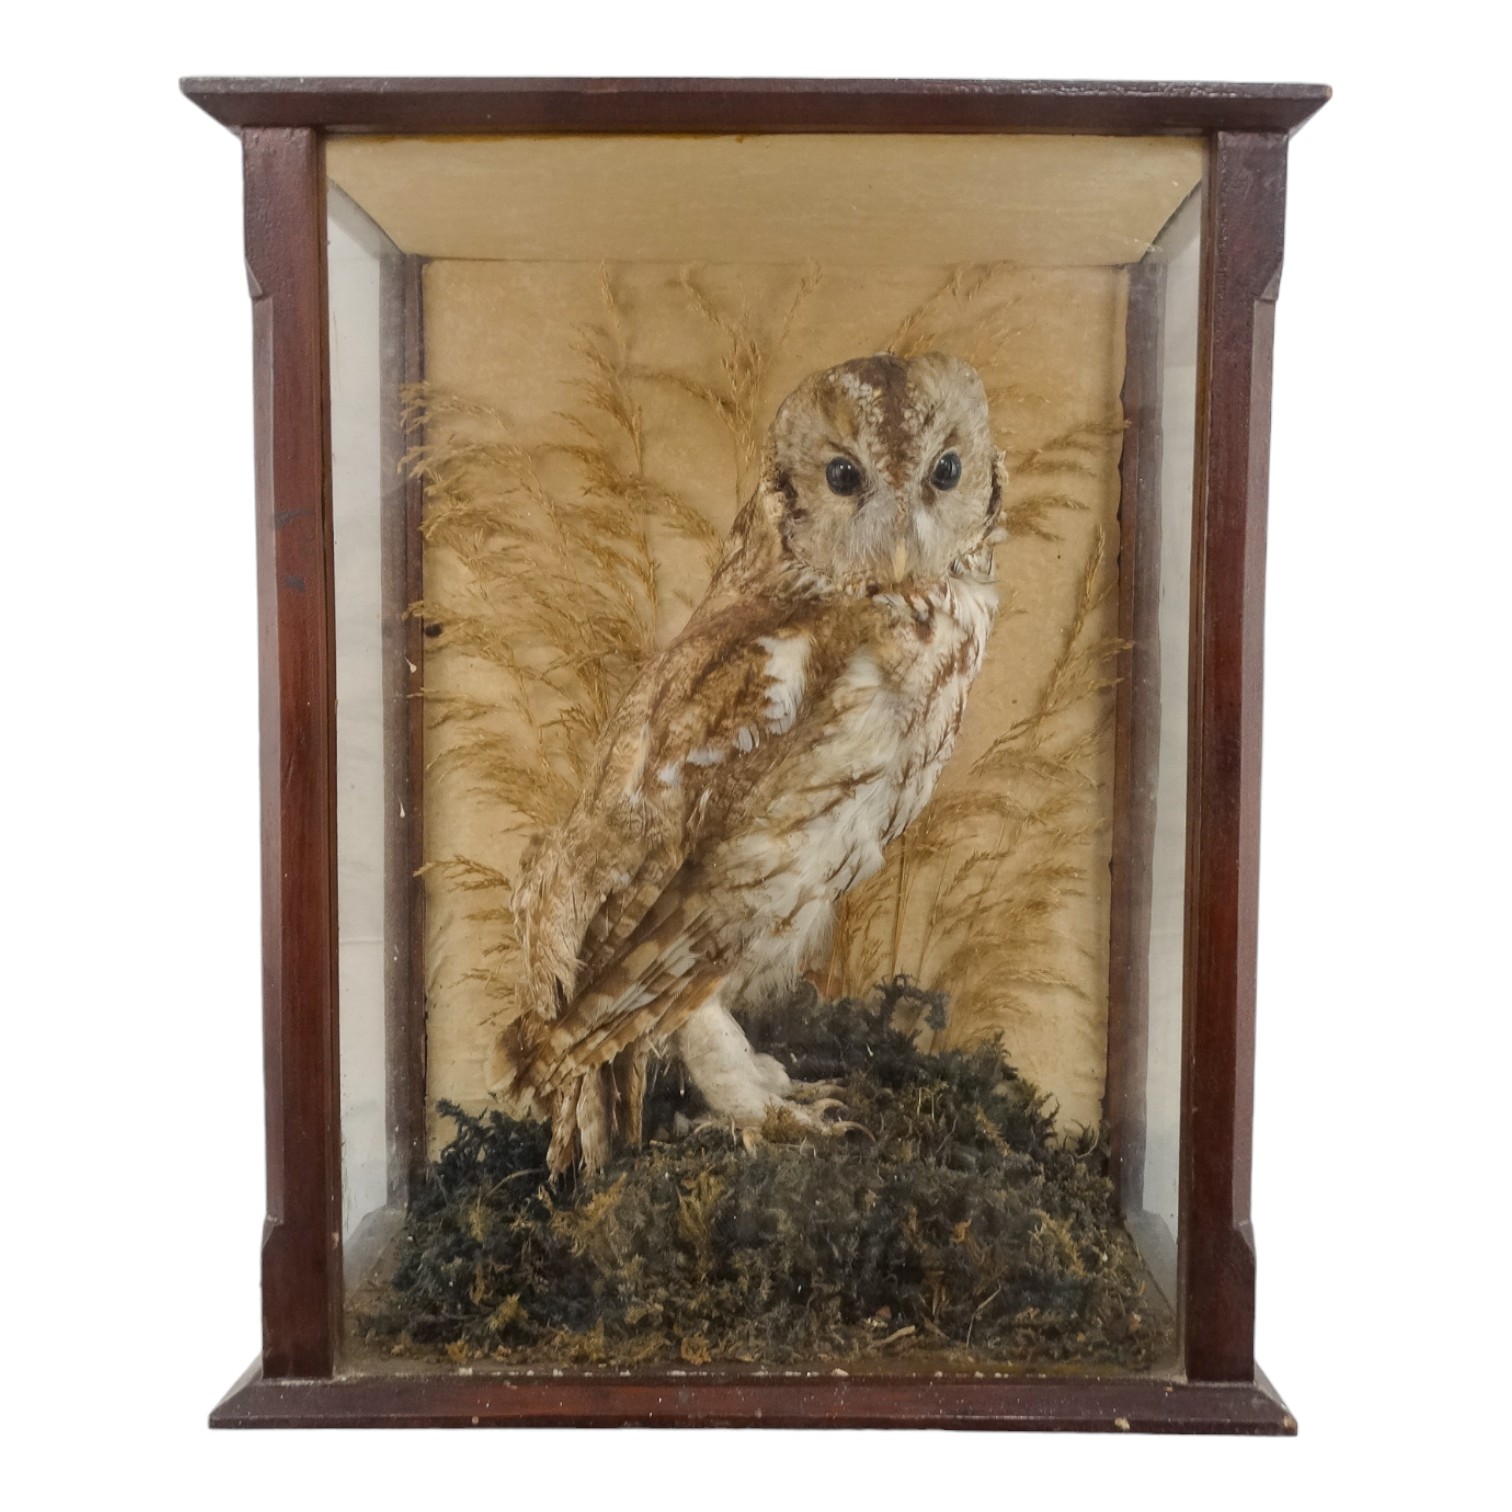 An early 20th century taxidermy tawny owl - standing on a naturalistic base with grasses the case